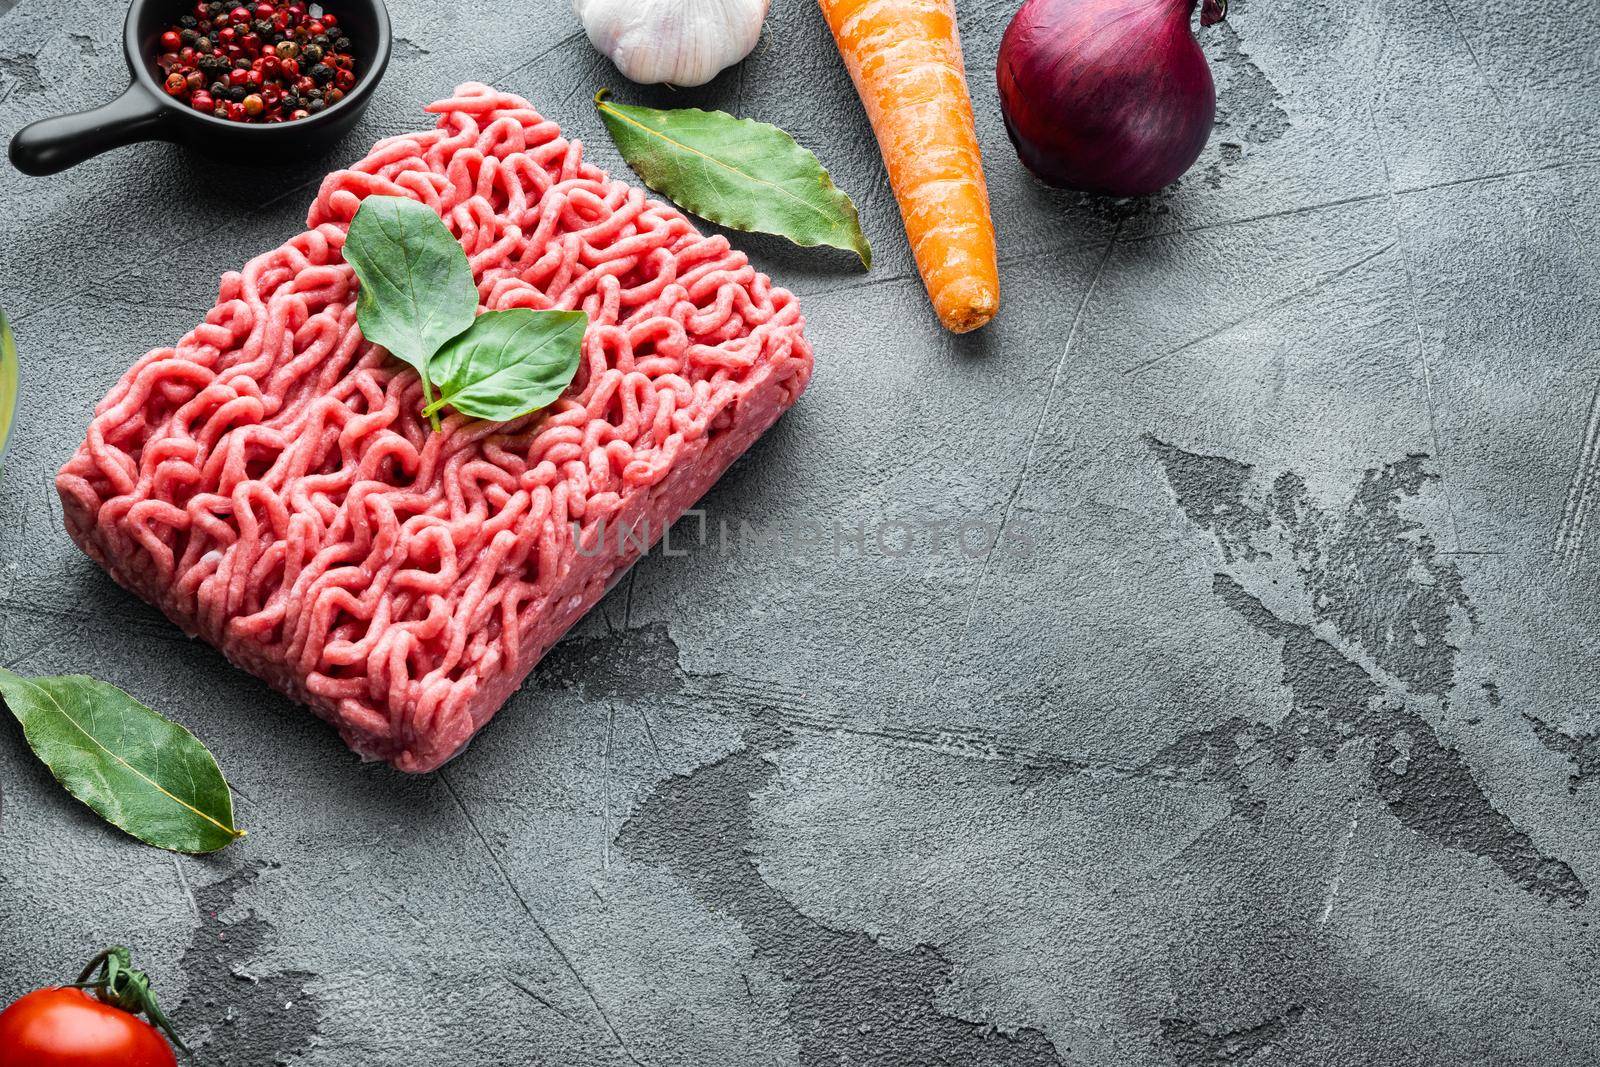 Ingredients for cooking Bolognese sauce, minced beef meat tomatoe and herbs, on gray stone background, with copy space for text by Ilianesolenyi